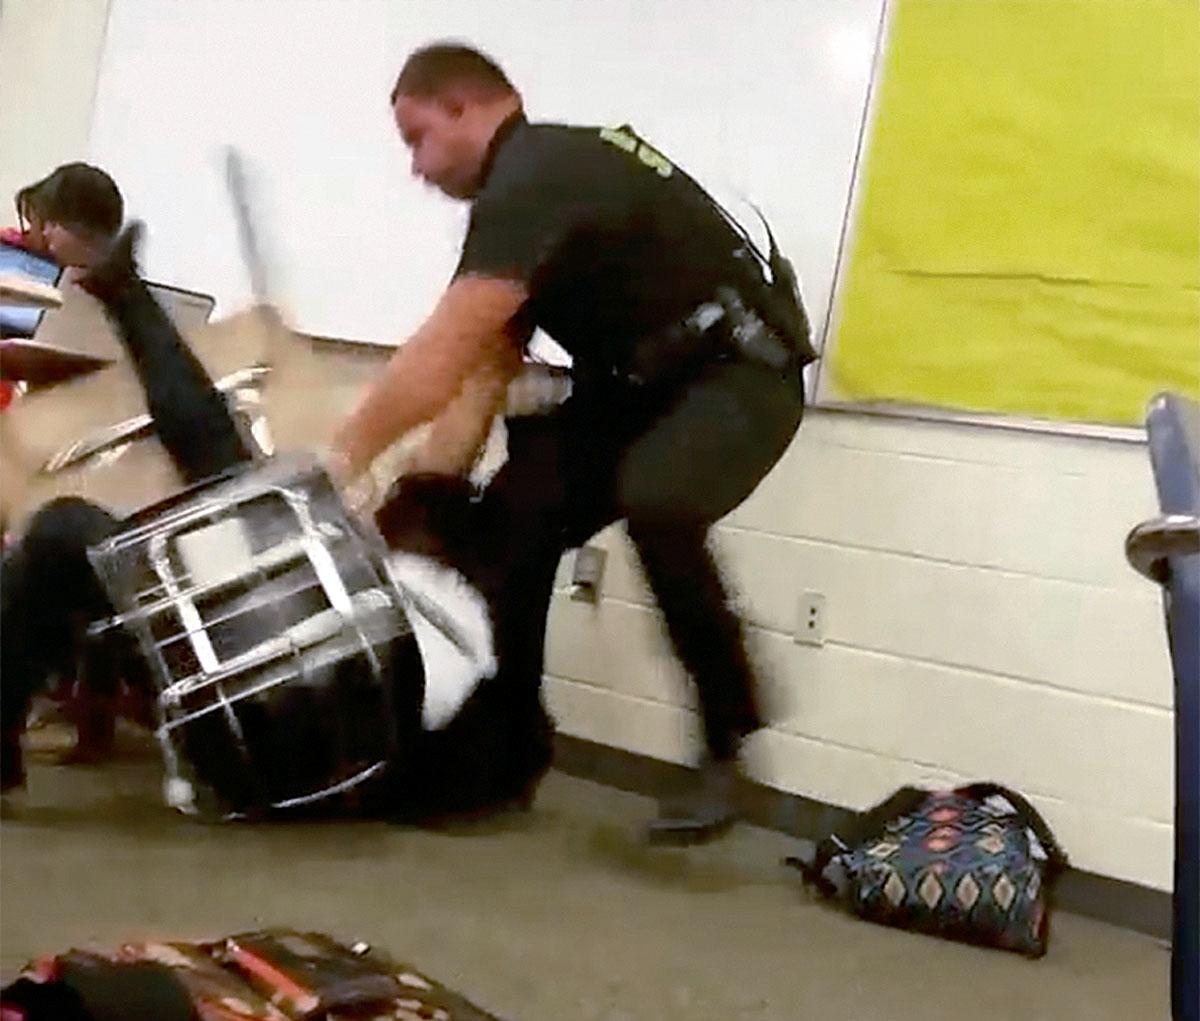 South Carolina Officer Will Not Face Charges For Throwing Student Across Classroom, But Do You Know Why?
